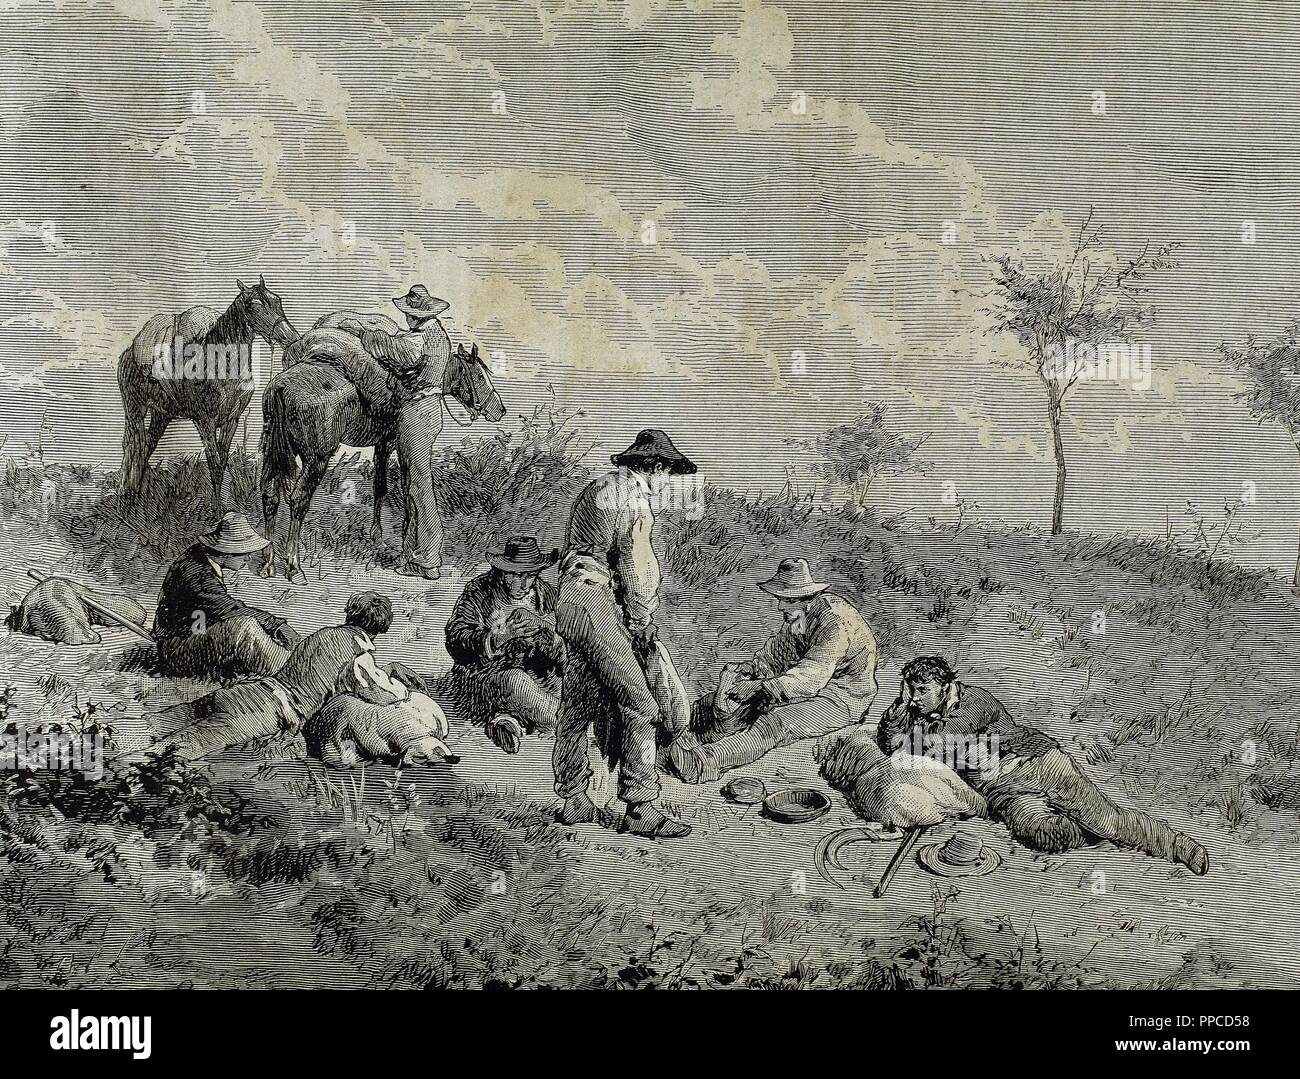 Mowing. Pause. Laborers eating. Engraving. 19th century. Spain. Stock Photo